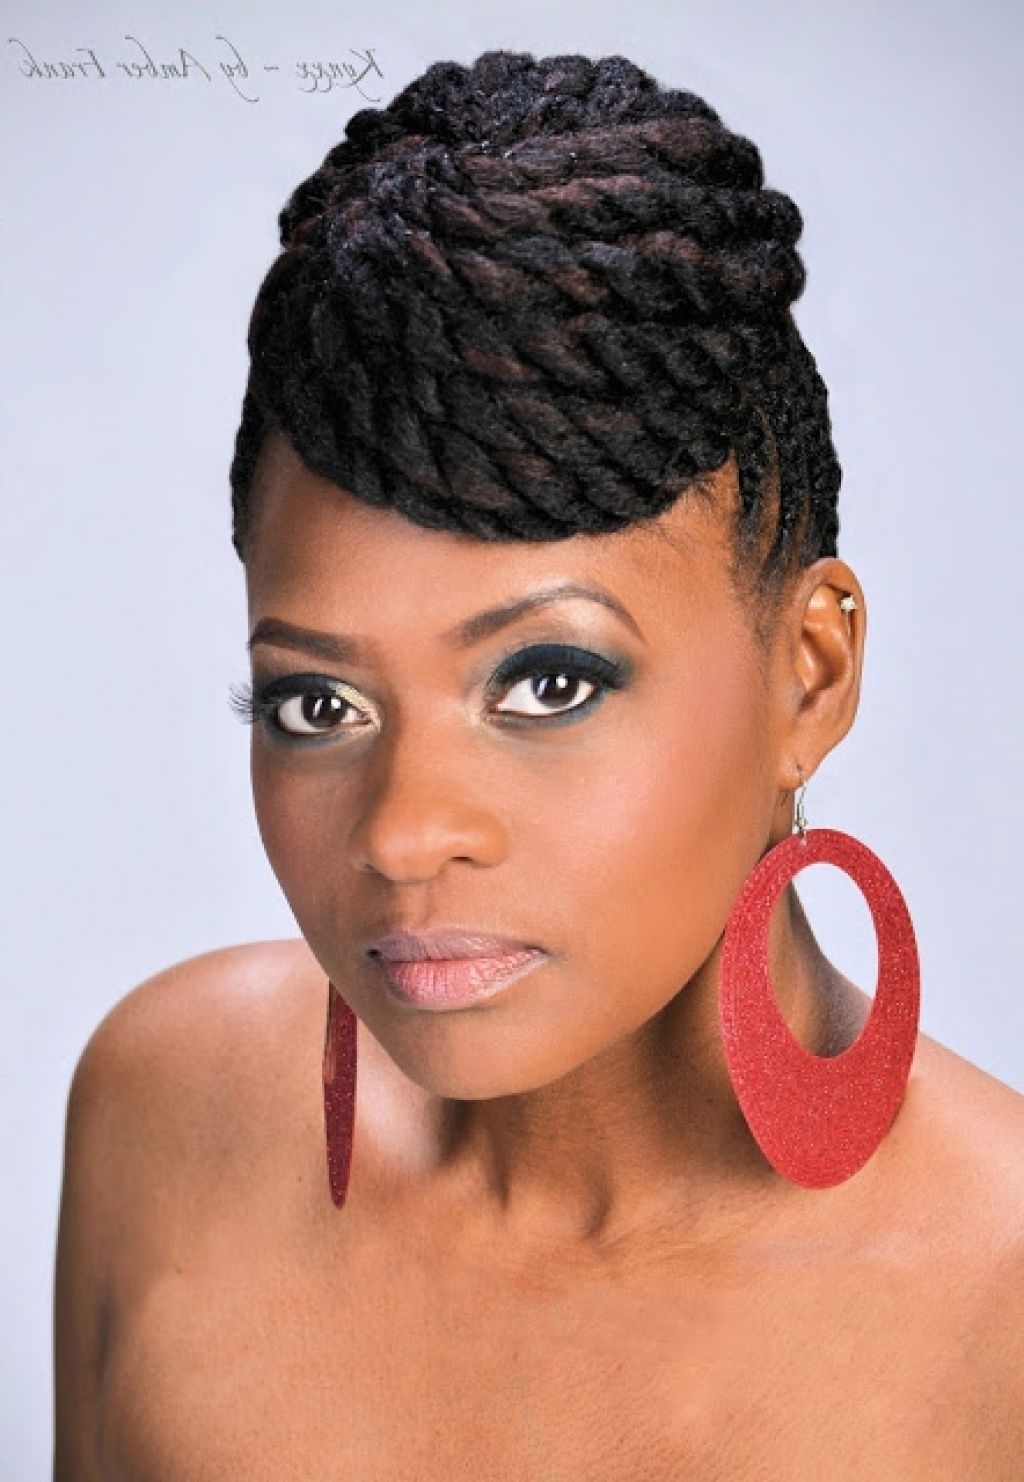 Photo: African Braid Updo Hairstyles Black Braid Hairstyles In African Braids Updo Hairstyles (View 14 of 15)